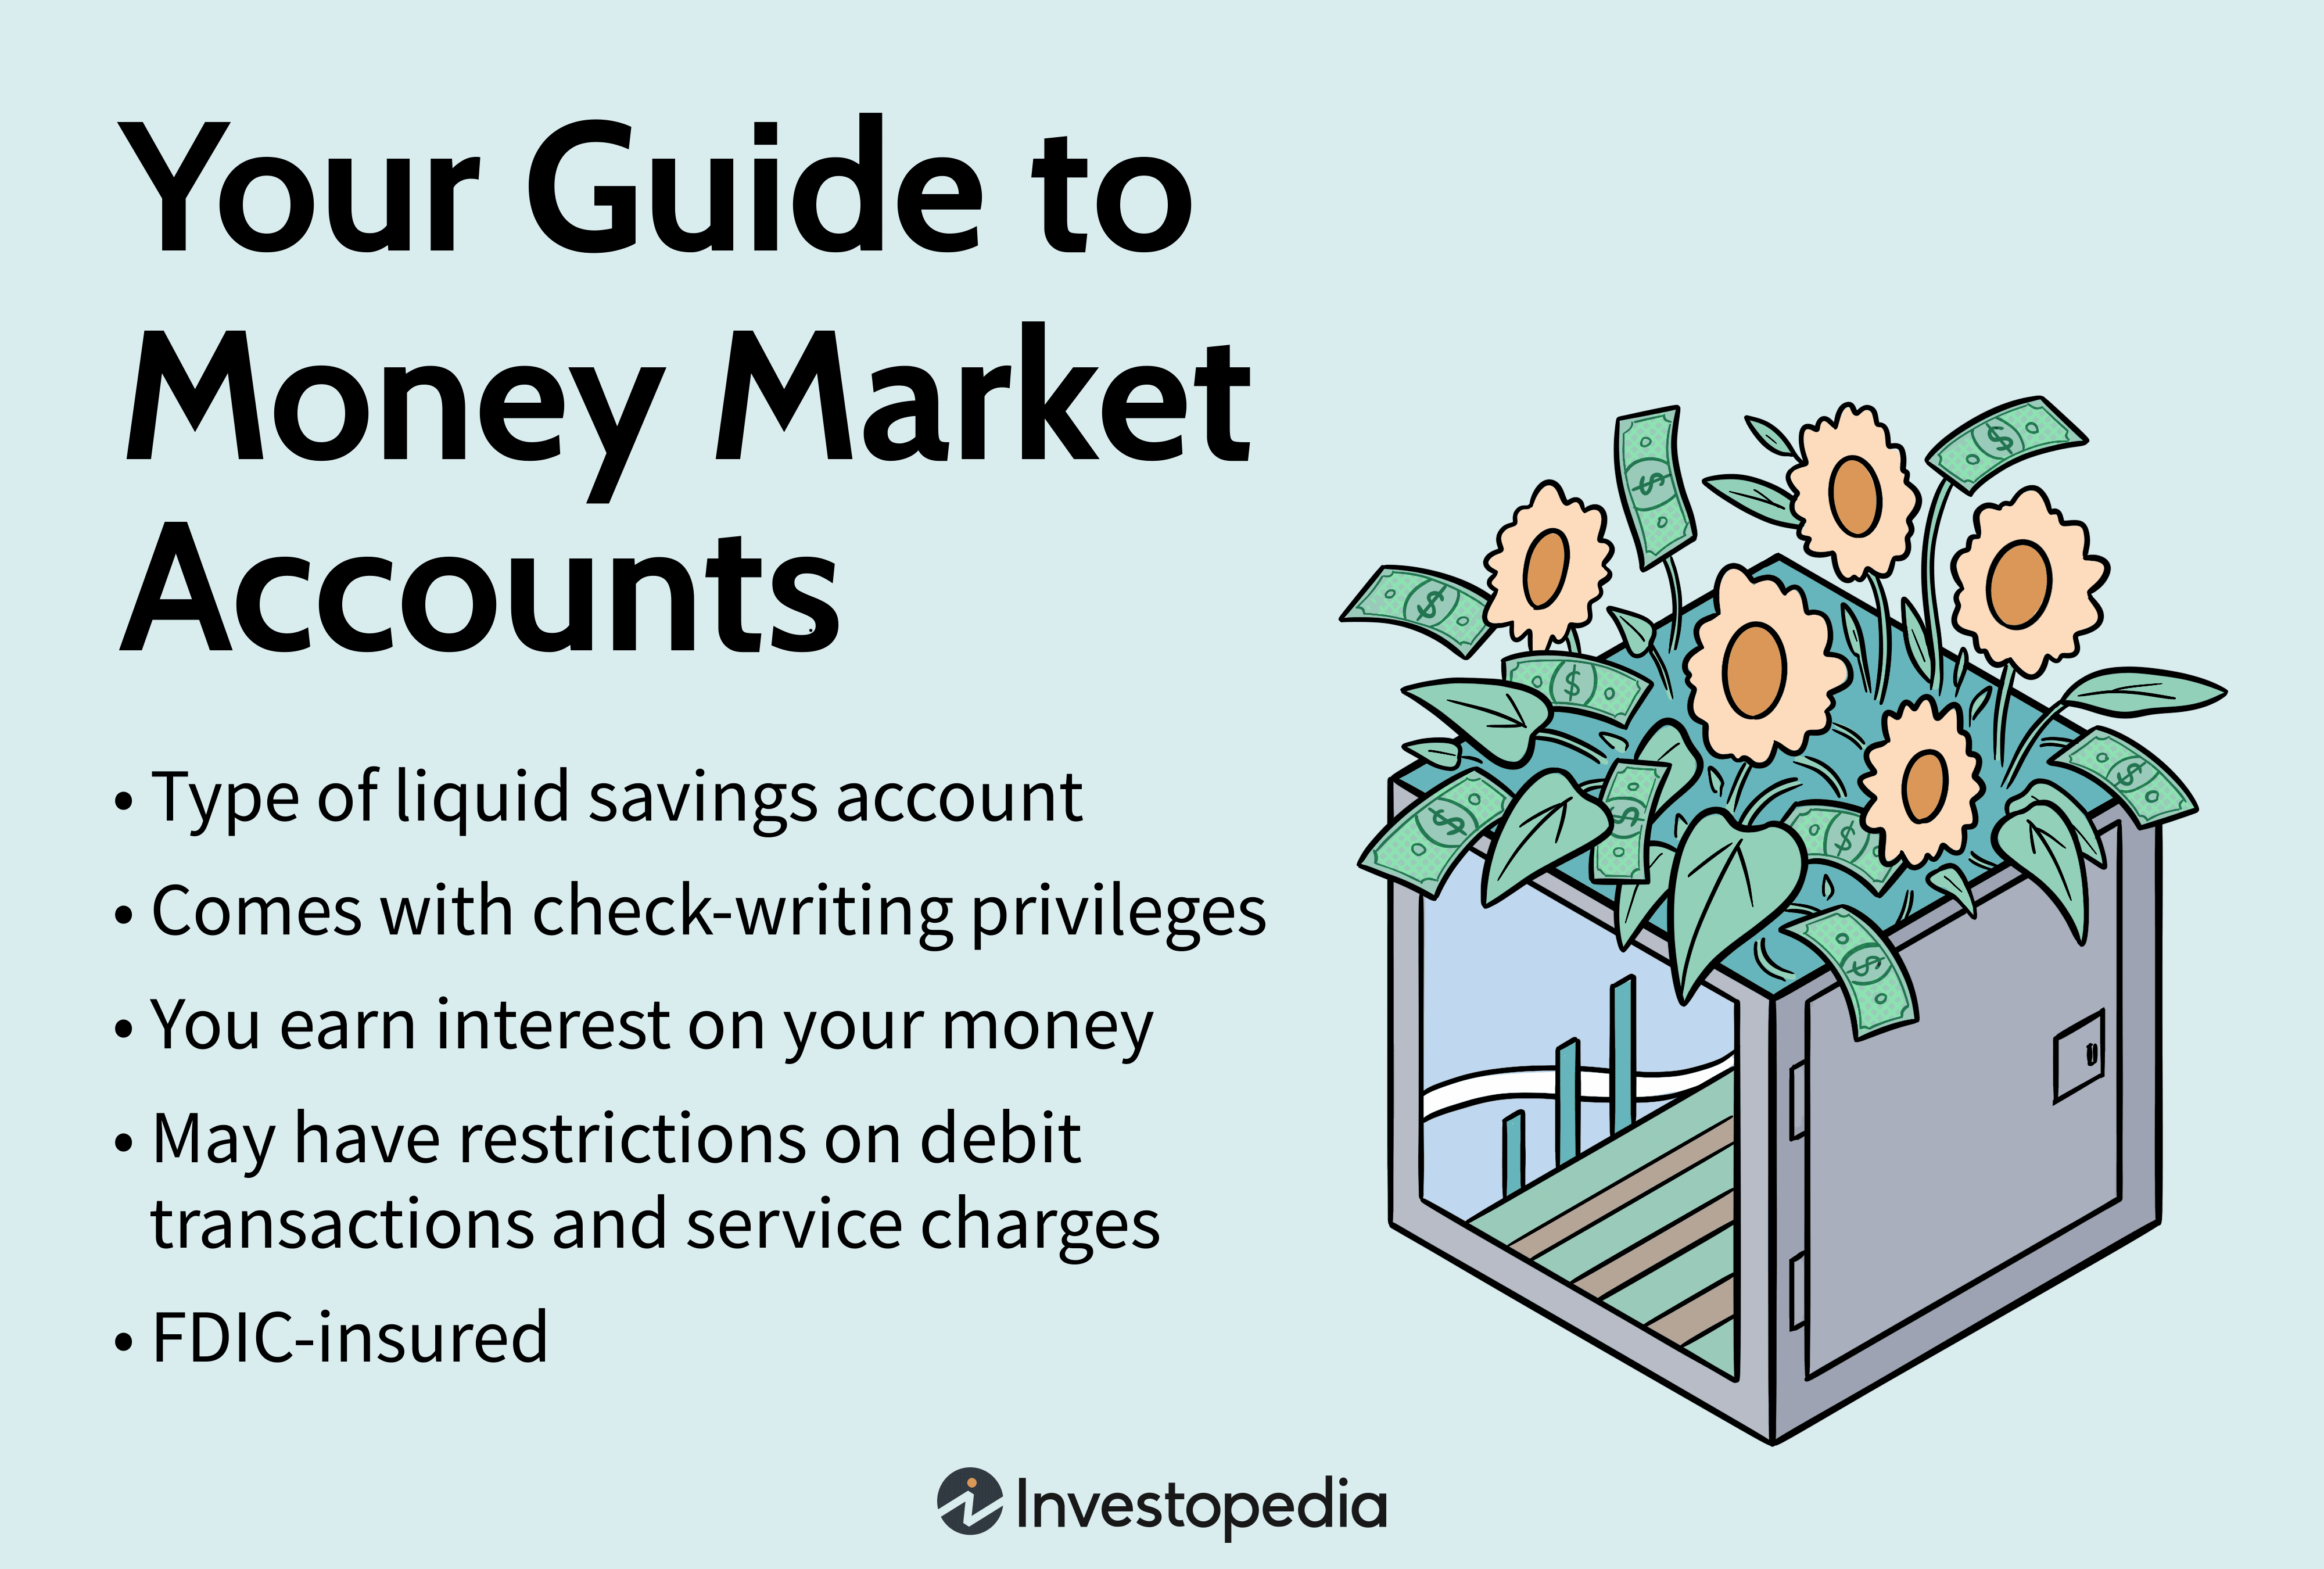 Your Guide to Money Market Accounts